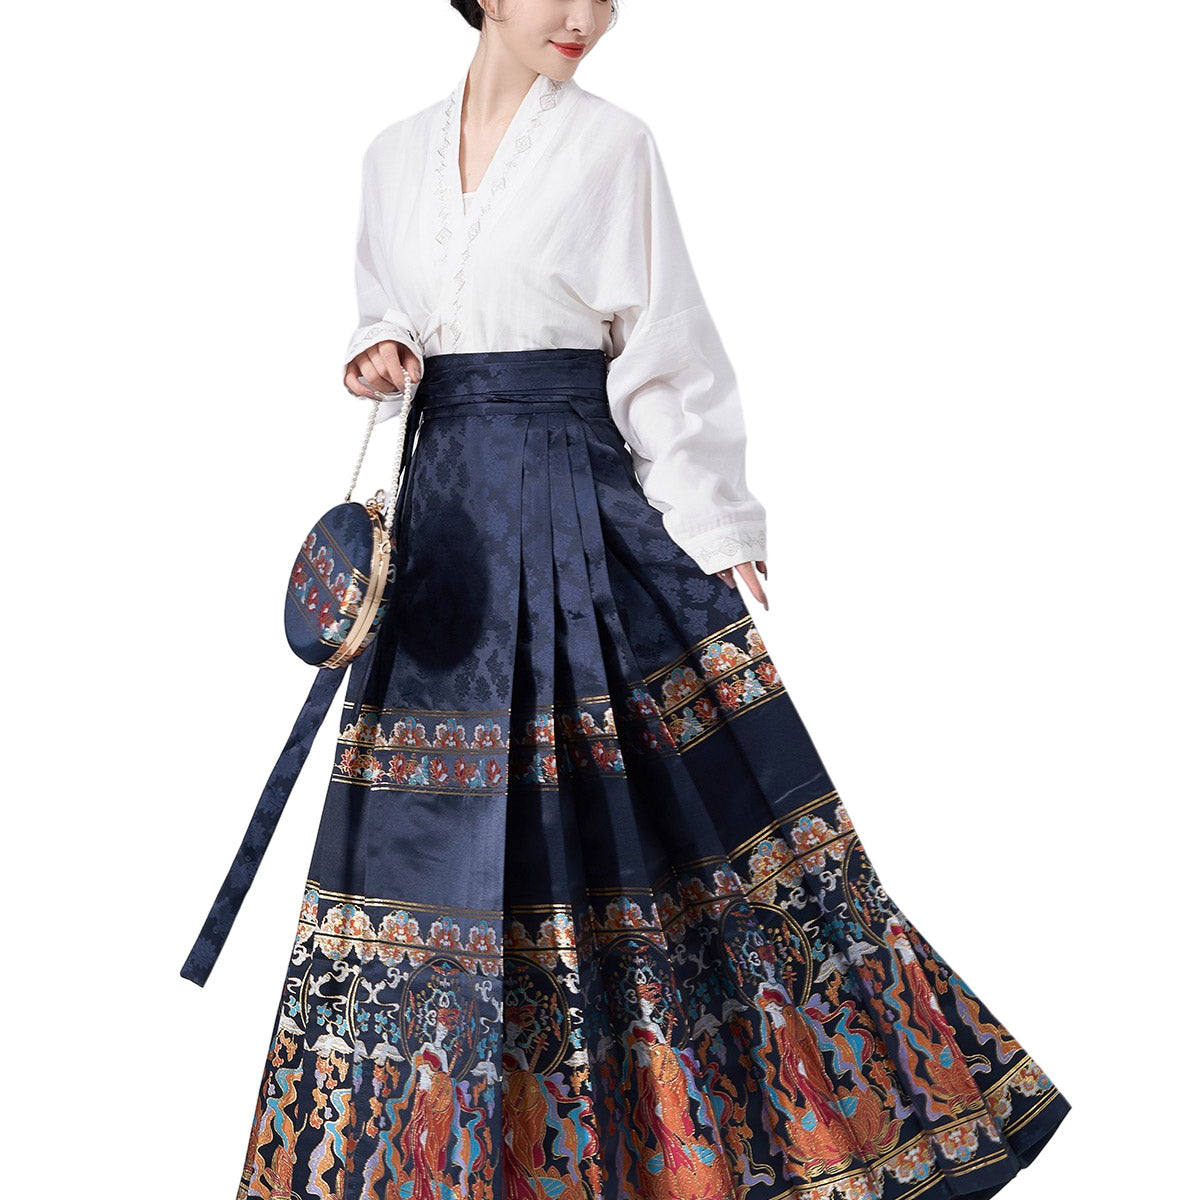 Mamianqun embroidered horse skirt and blouse for women in navy blue with colorful embroidery